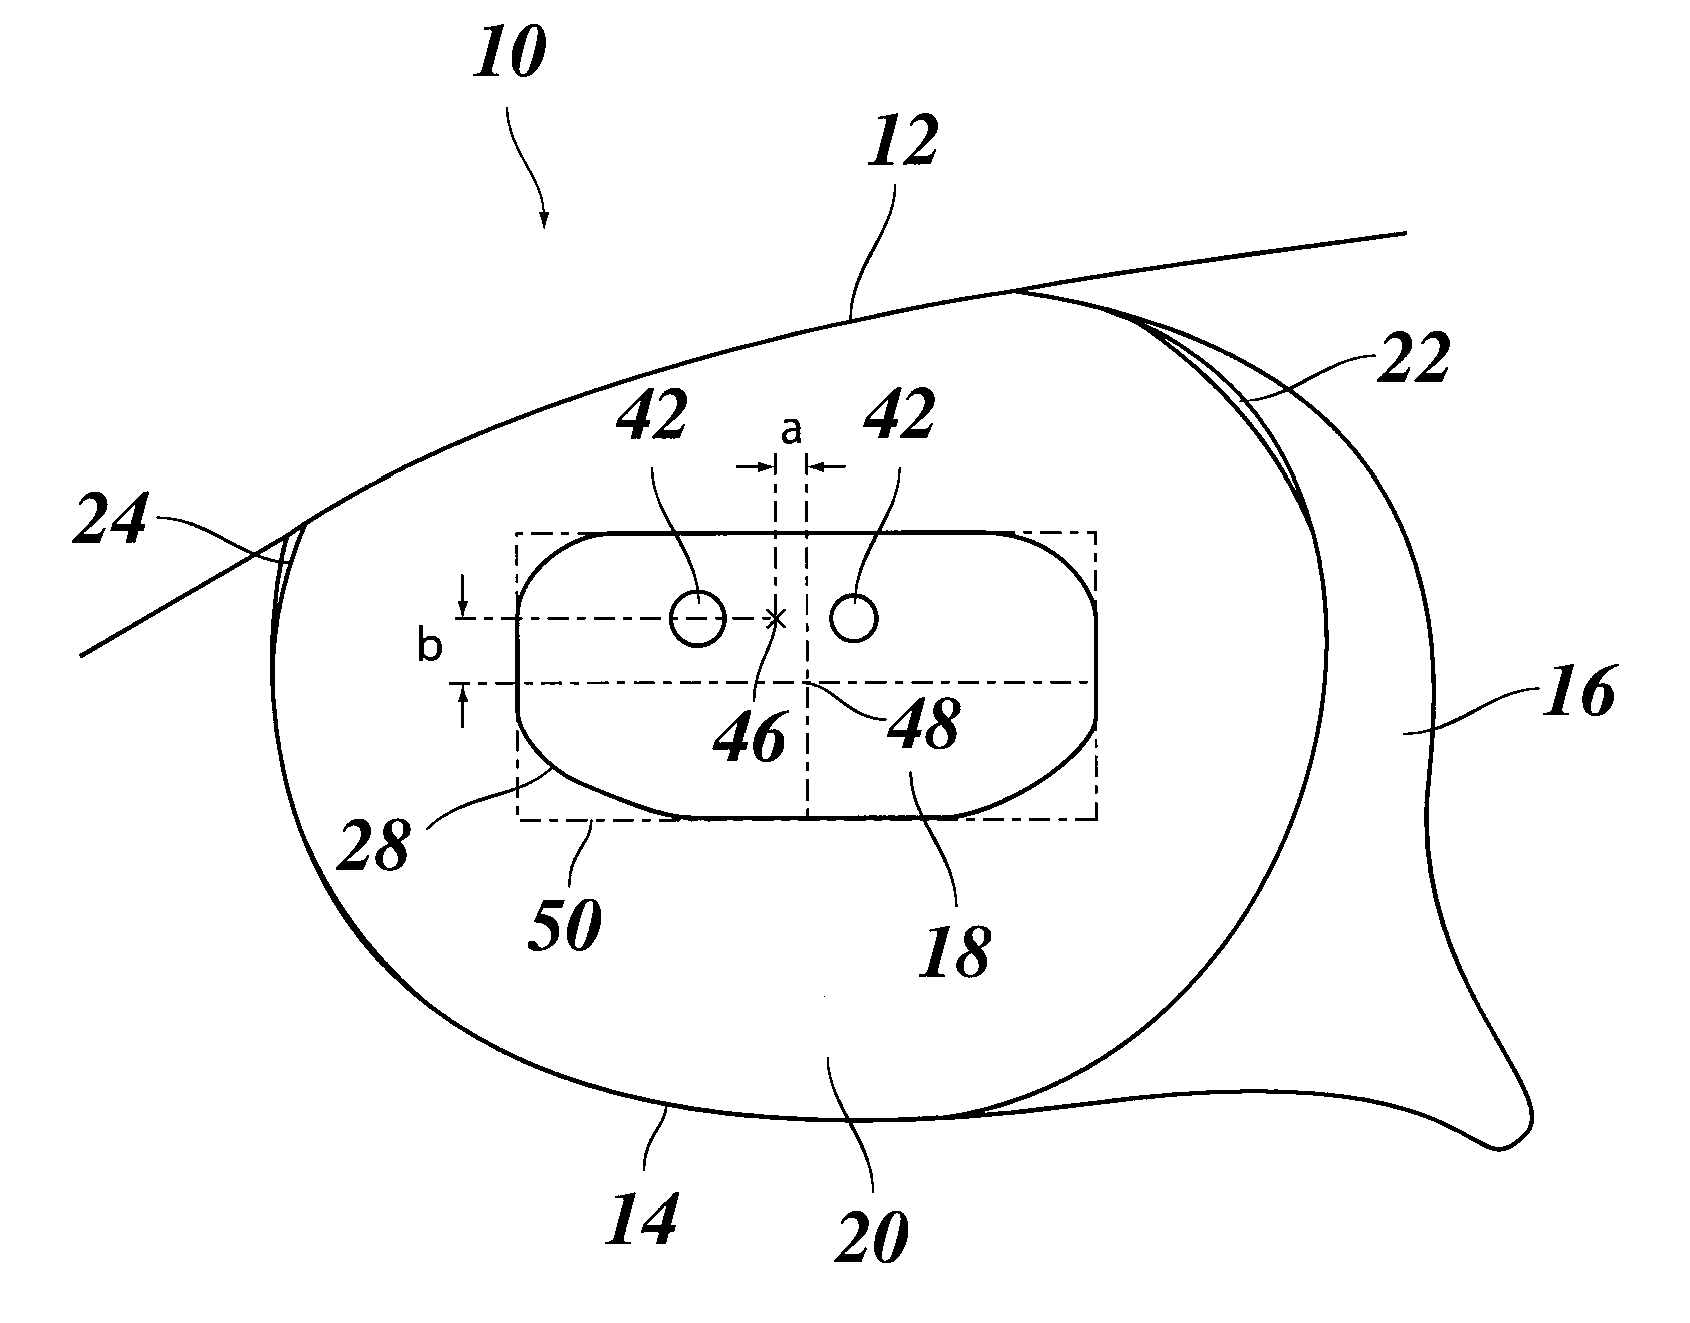 Method of generating a normalized digital image of an iris of an eye